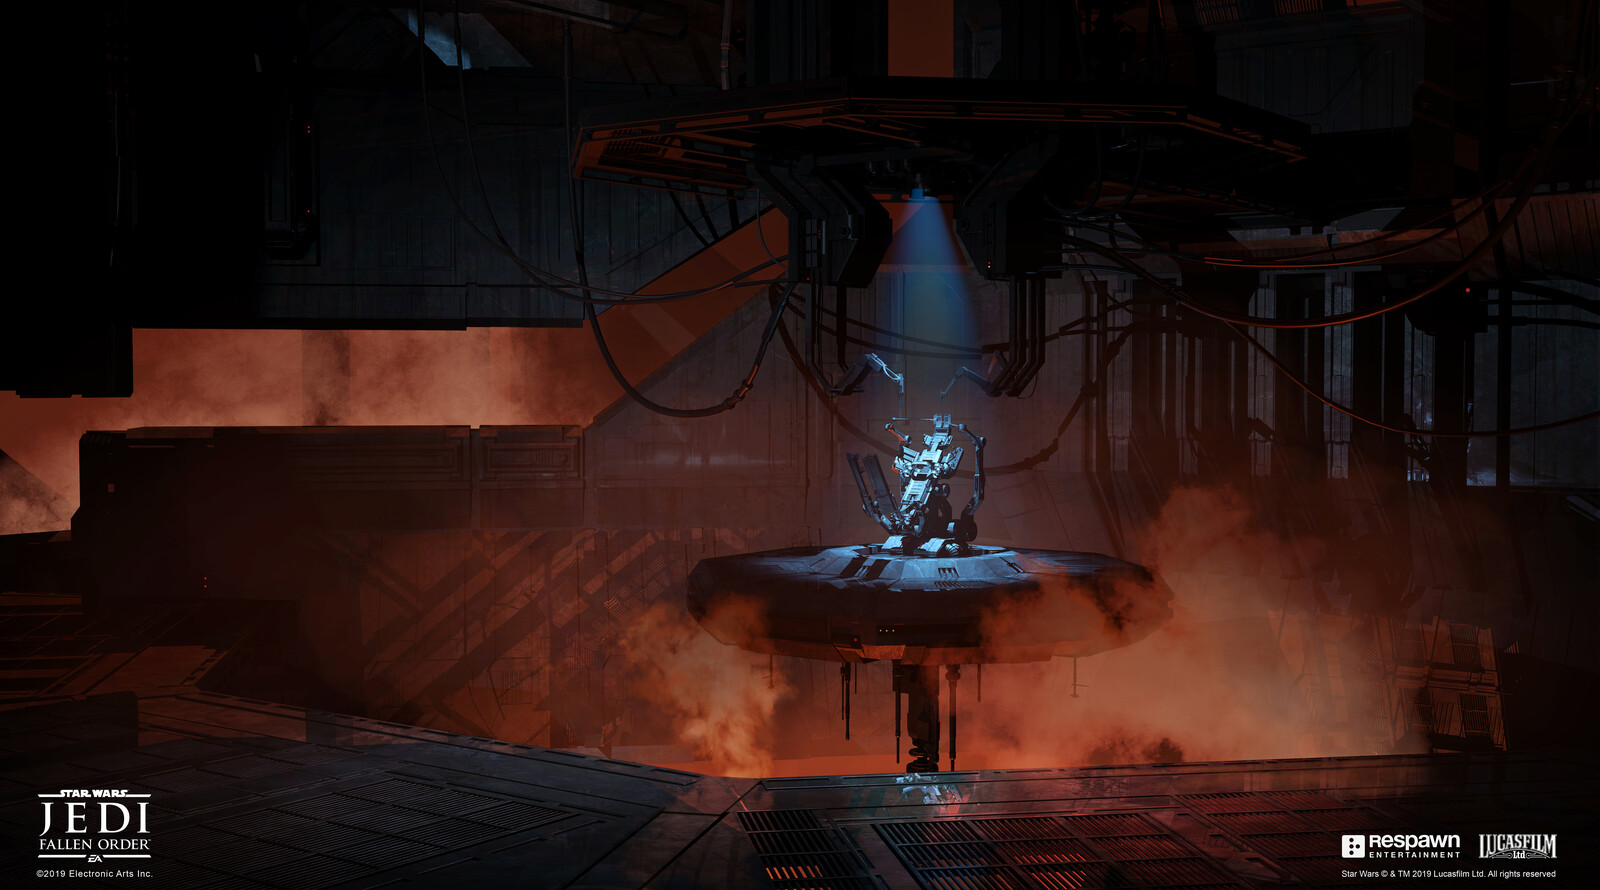 The challenge of this room was to keep the torture chair as the focal center  while allowing enough floor space for the final boss battle with the Inquisitor. The added difficulty was to design the room for Darth Vader to make his entrance from above.